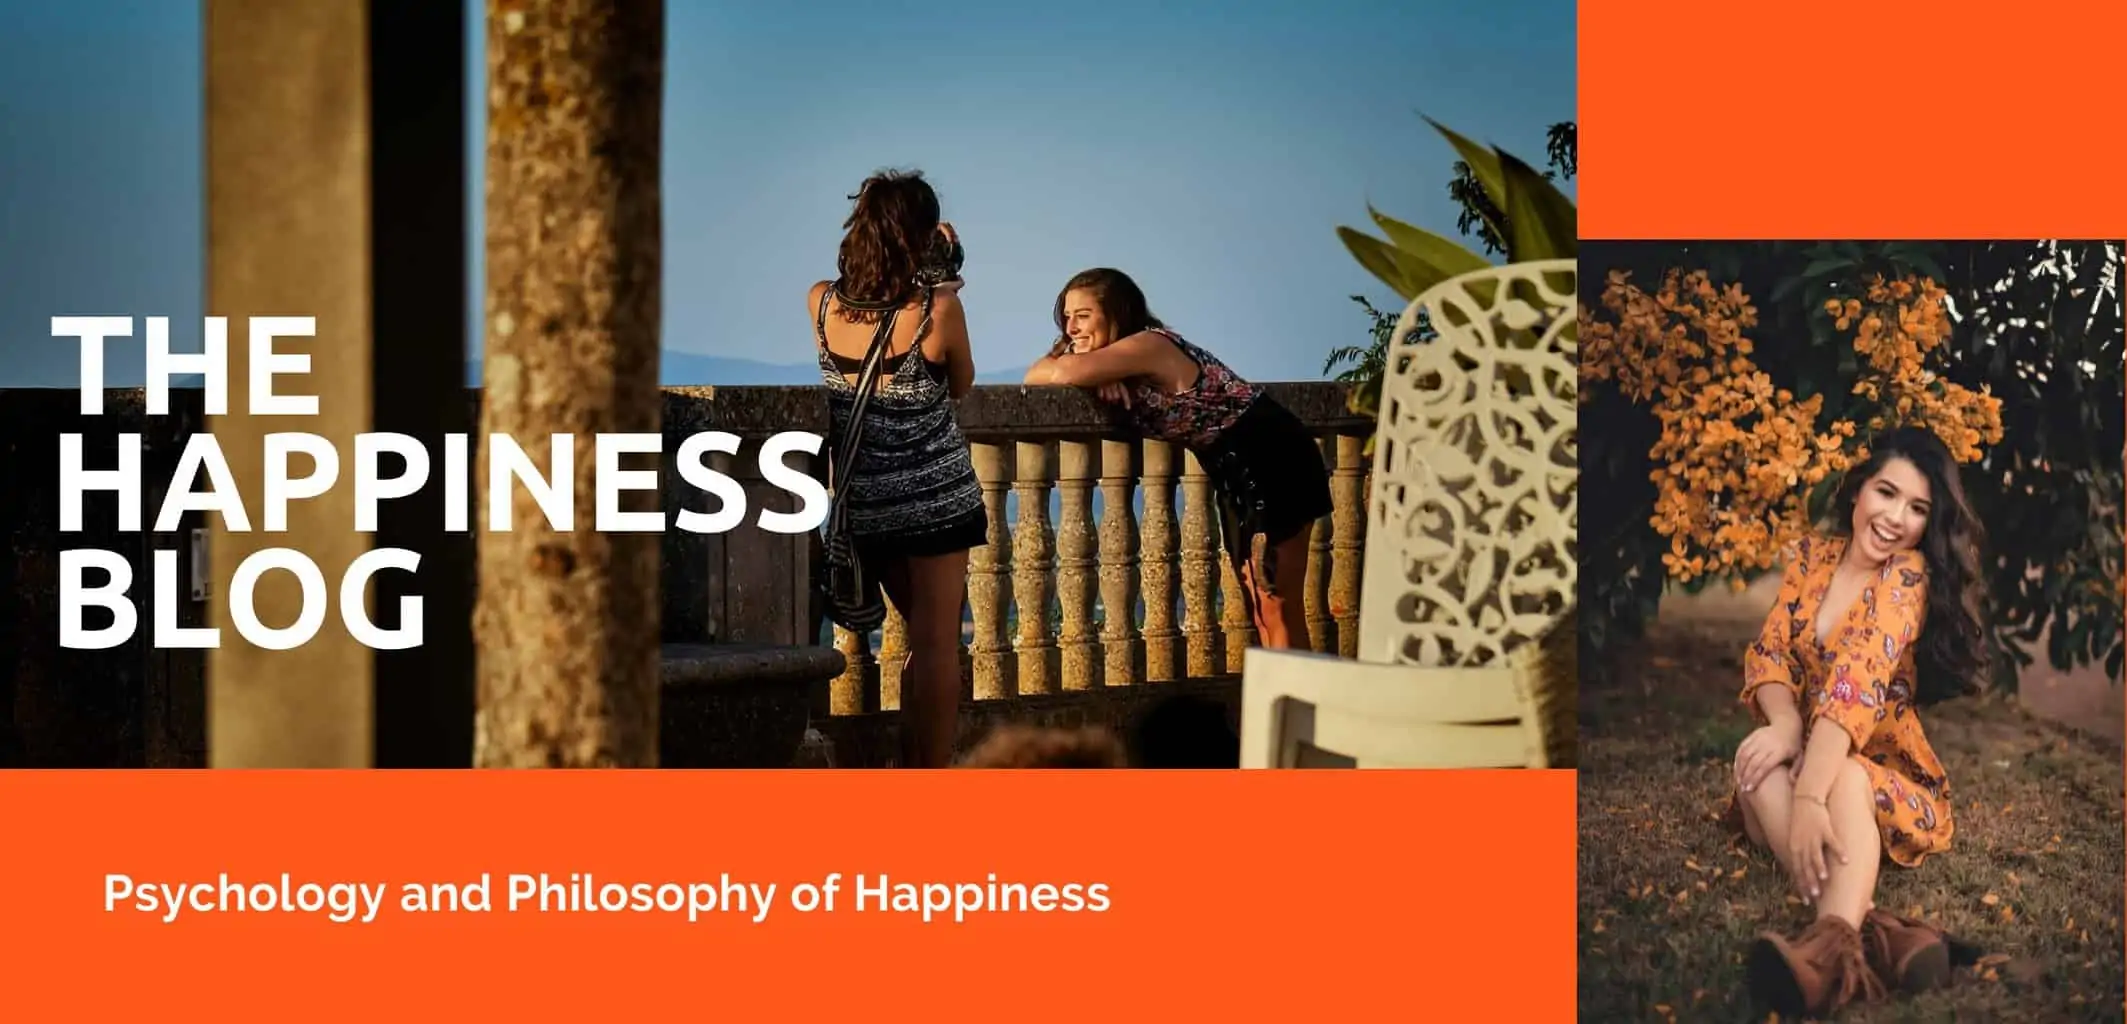 The Happiness Blog Homepage Header